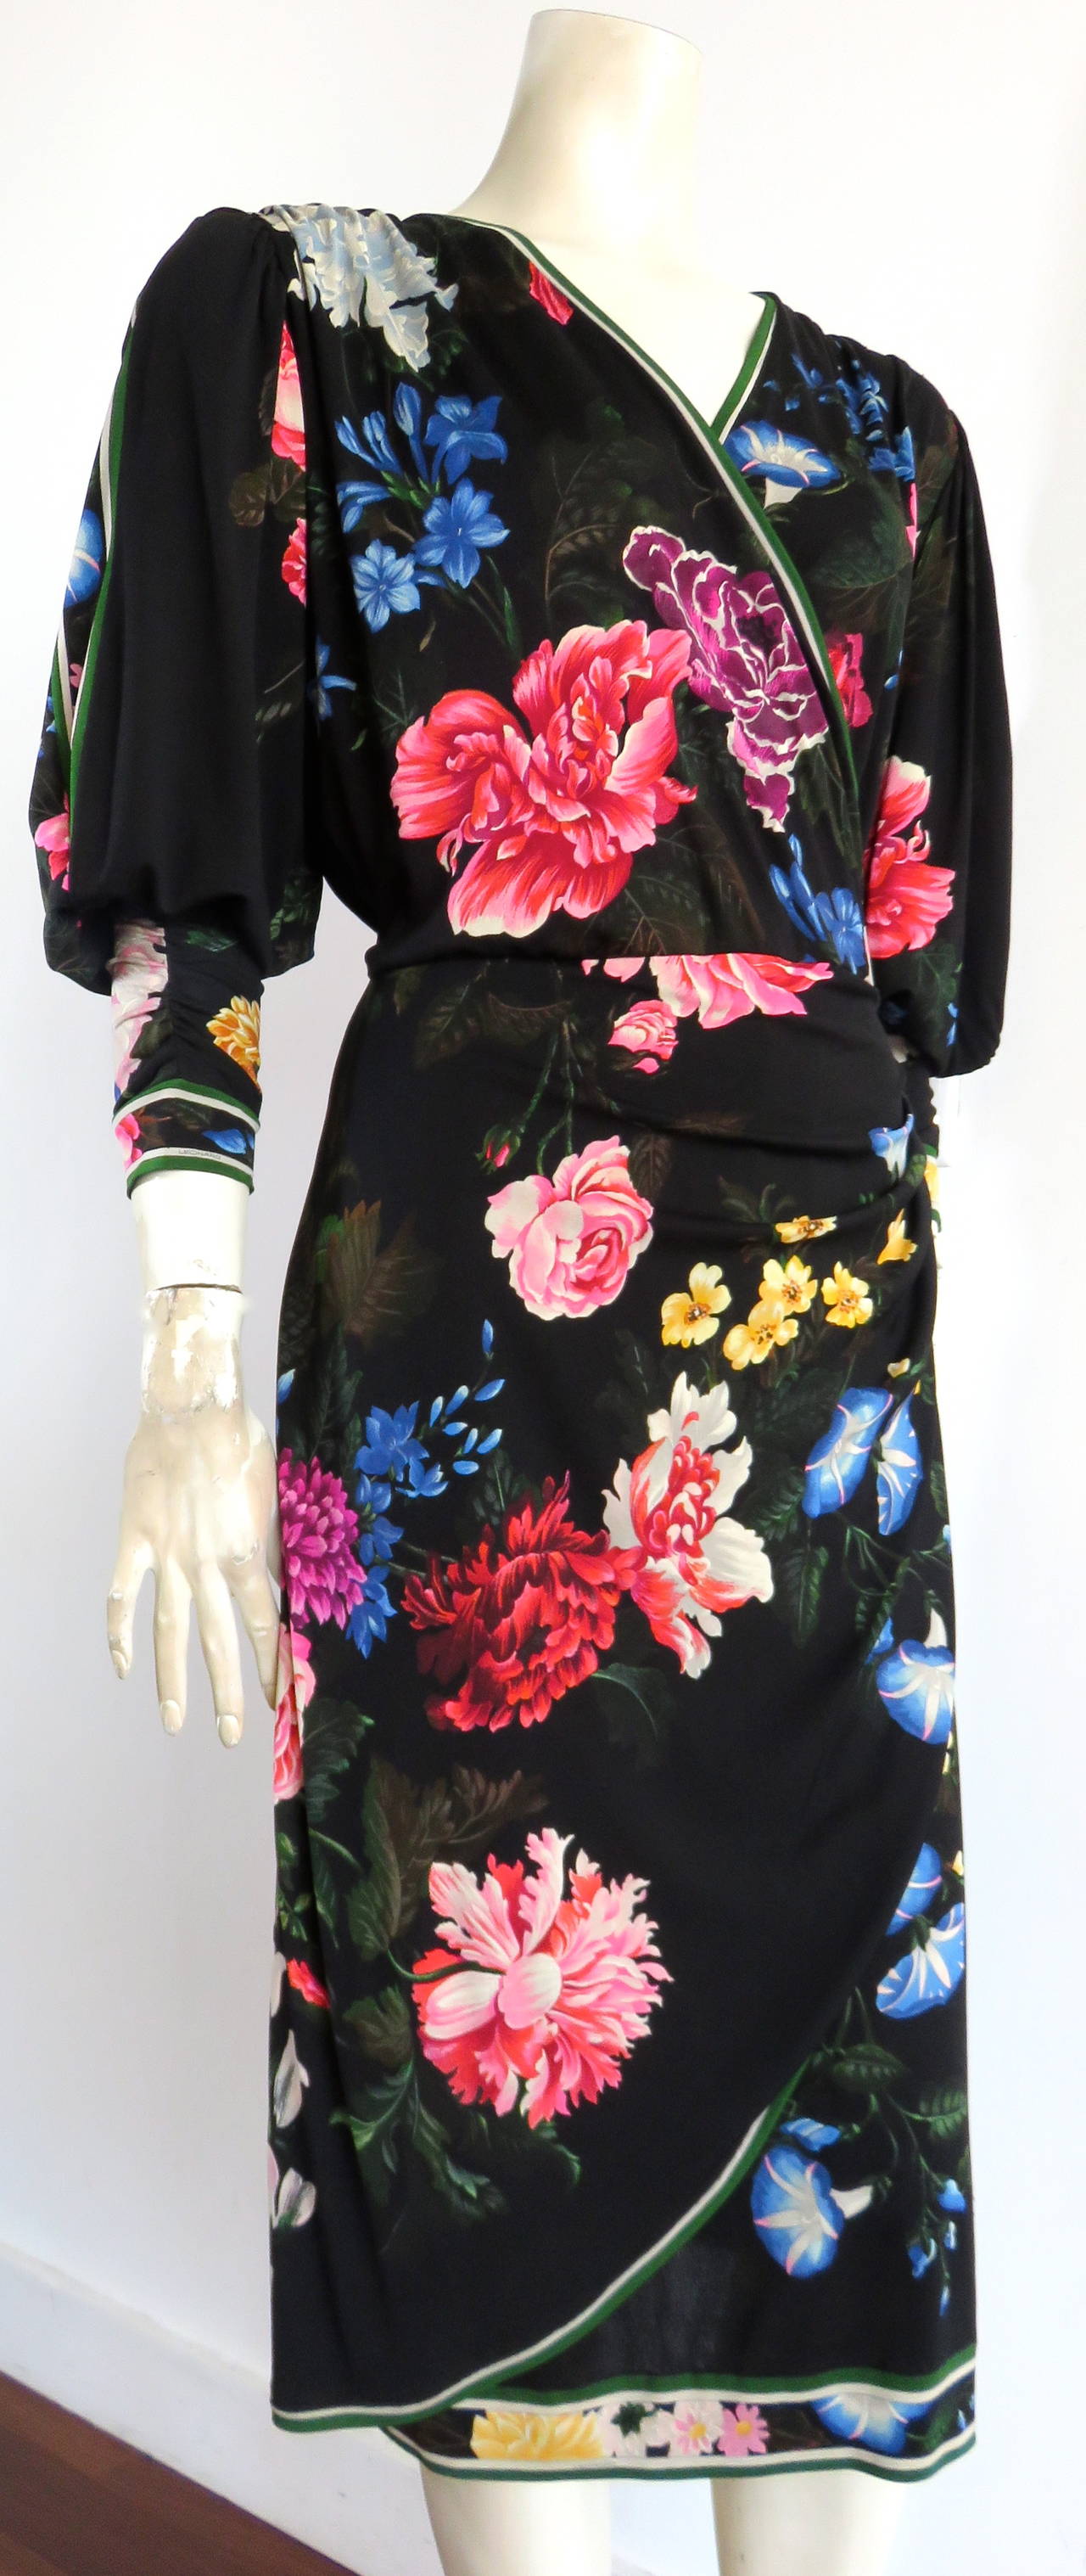 1983 LEONARD PARIS, silk, knit jersey dress with beautiful, painted floral artwork.

This gorgeous dress features a black background with multi-color, painted floral artworks.  The dress also features the signature, Leonard-style, striped border